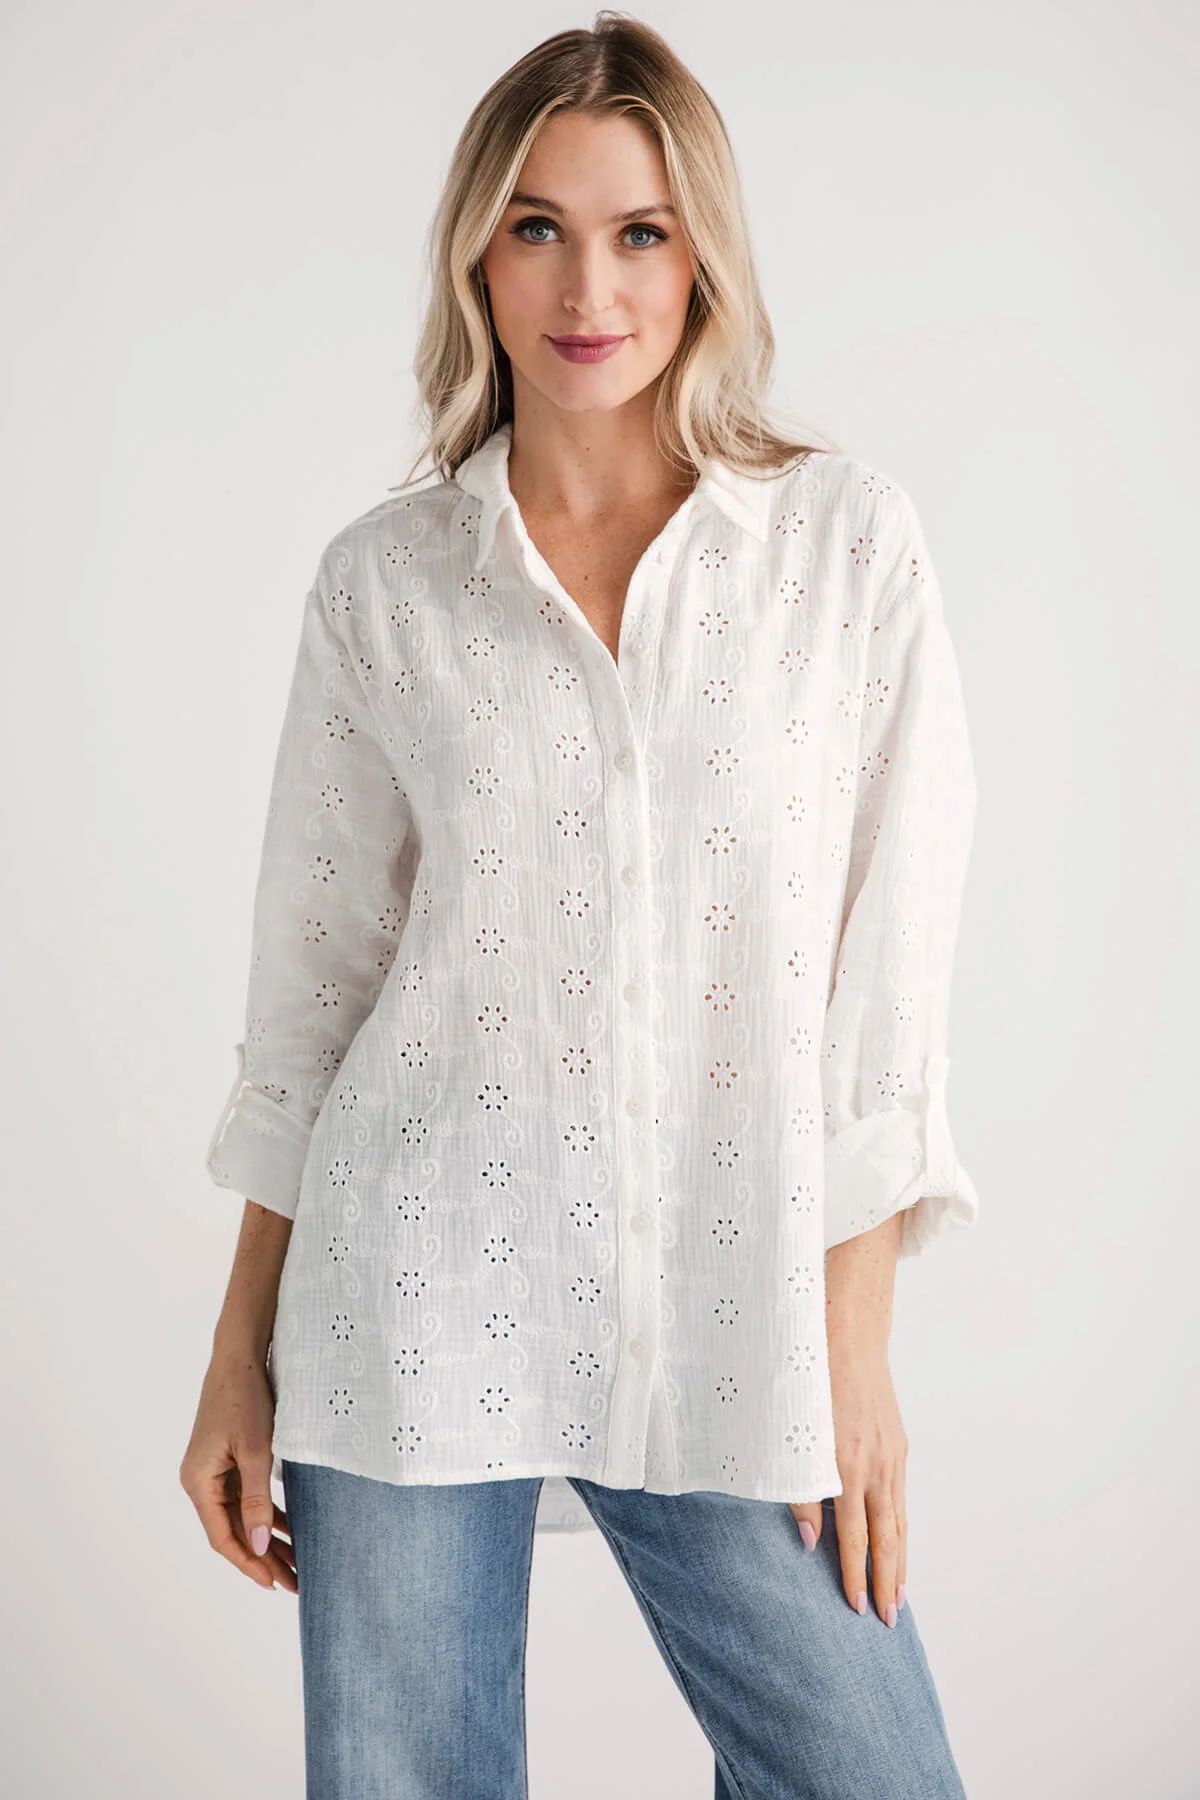 Lovestitch Eyelet Embroidered Button Down Top | Social Threads